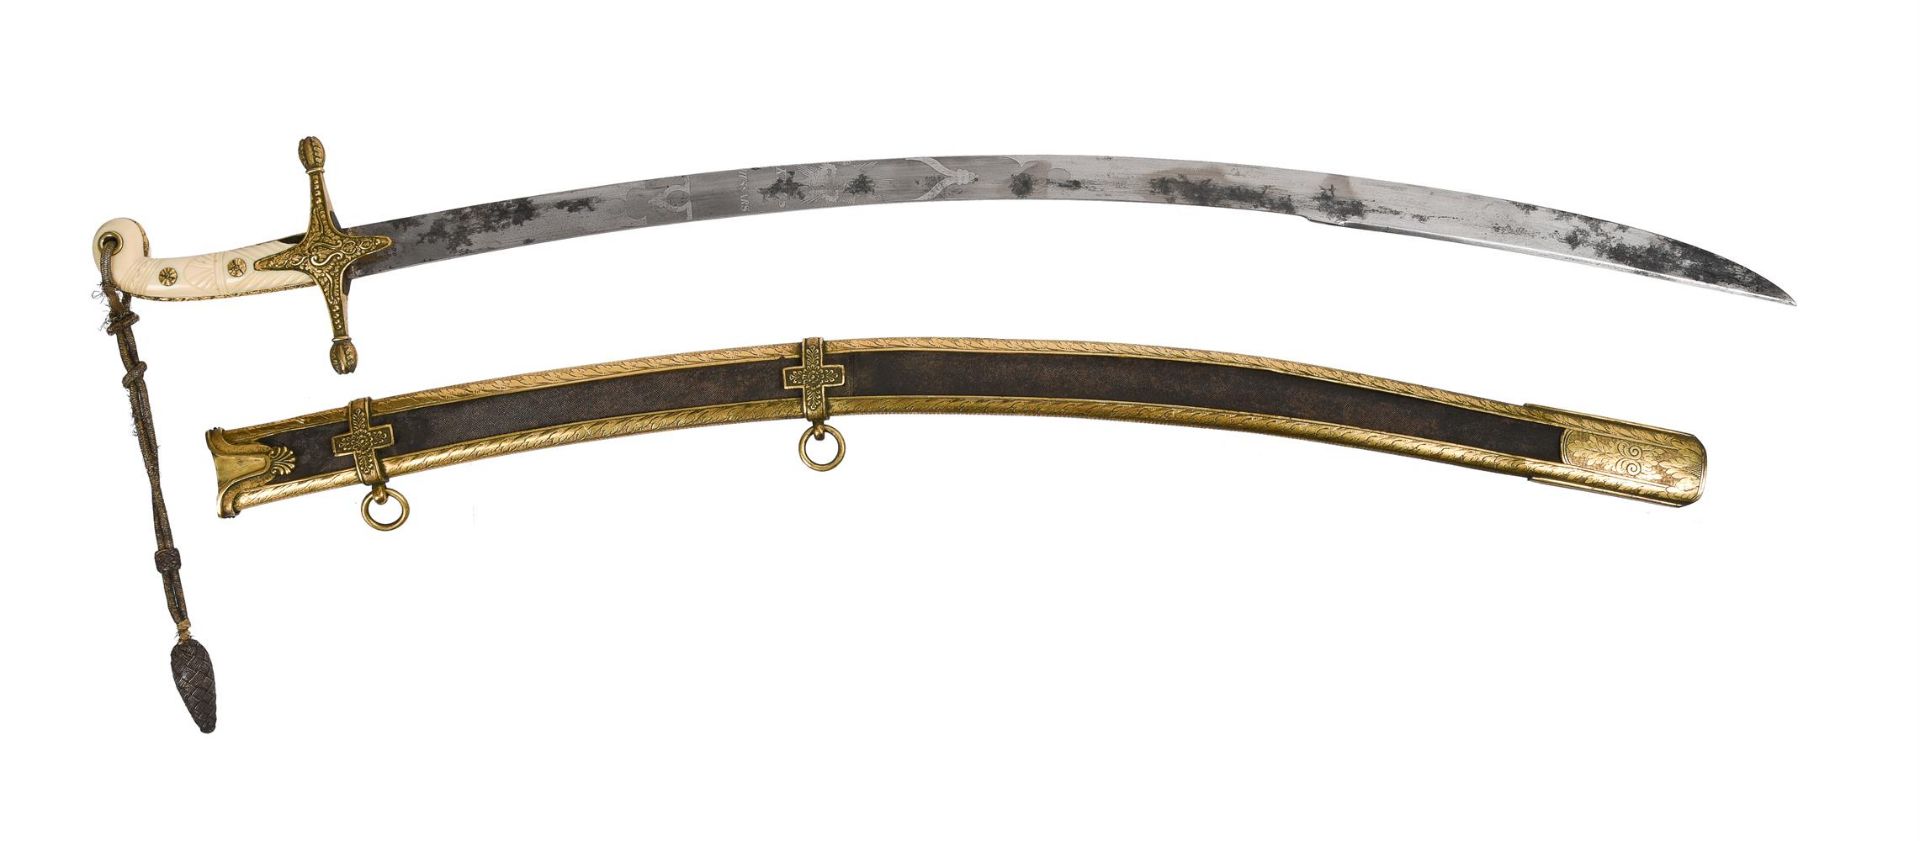 Y A GEORGE IV/WILLIAM IV LIGHT CAVALRY OFFICER'S LEVEE SCIMITAR OR 'MAMELUKE' AND SCABBARD OF THE 15 - Image 2 of 6